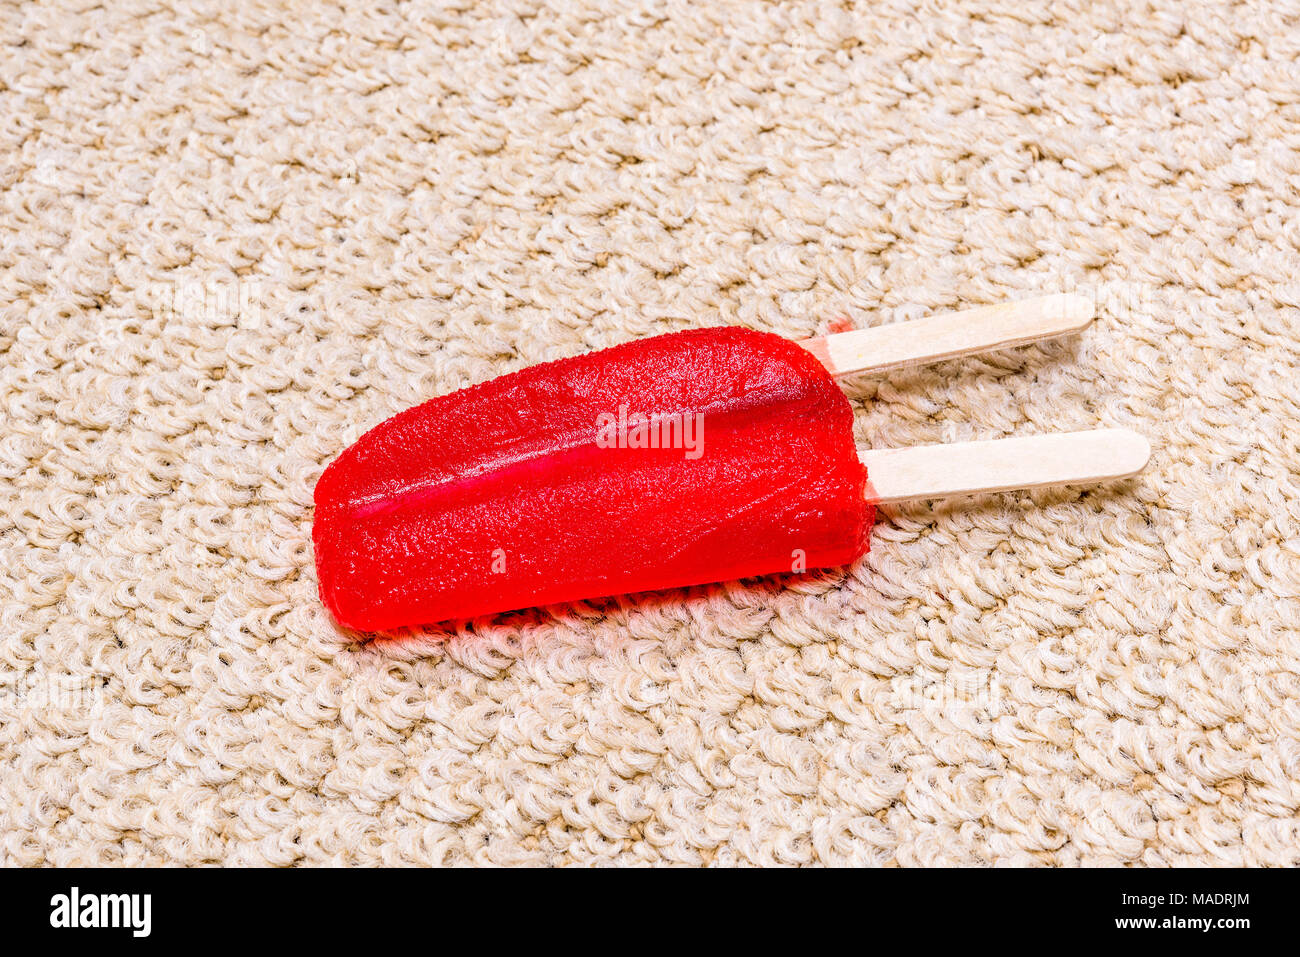 A time lapse of a melting popsicle on white carpet shows the icy treat melt into a sticky juice and absorb right into the carpet. Stock Photo